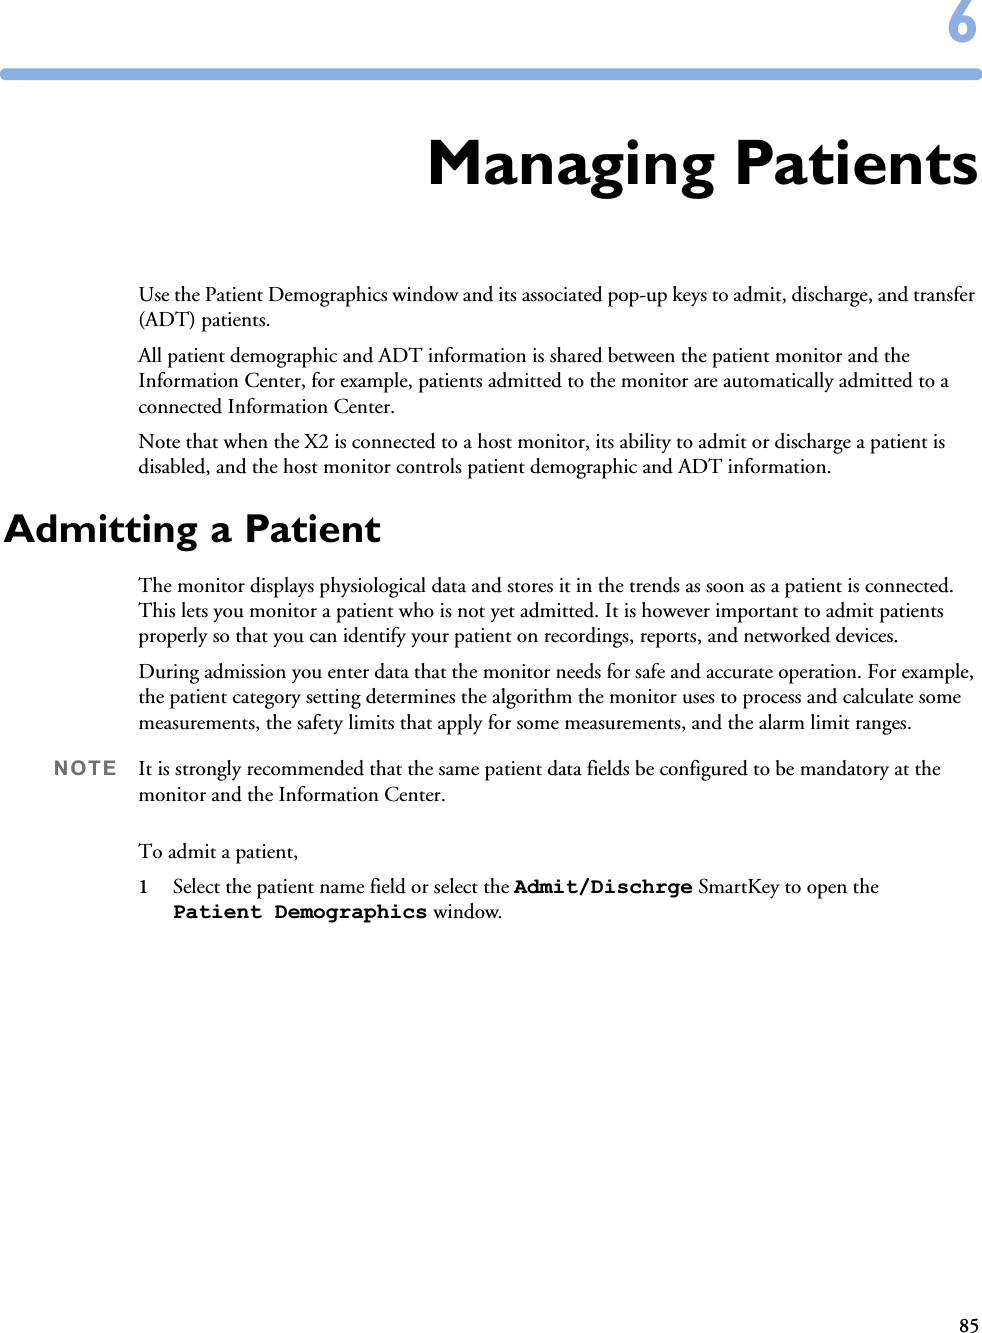 8566Managing PatientsUse the Patient Demographics window and its associated pop-up keys to admit, discharge, and transfer (ADT) patients. All patient demographic and ADT information is shared between the patient monitor and the Information Center, for example, patients admitted to the monitor are automatically admitted to a connected Information Center.Note that when the X2 is connected to a host monitor, its ability to admit or discharge a patient is disabled, and the host monitor controls patient demographic and ADT information.Admitting a PatientThe monitor displays physiological data and stores it in the trends as soon as a patient is connected. This lets you monitor a patient who is not yet admitted. It is however important to admit patients properly so that you can identify your patient on recordings, reports, and networked devices. During admission you enter data that the monitor needs for safe and accurate operation. For example, the patient category setting determines the algorithm the monitor uses to process and calculate some measurements, the safety limits that apply for some measurements, and the alarm limit ranges.NOTE It is strongly recommended that the same patient data fields be configured to be mandatory at the monitor and the Information Center. To admit a patient,1Select the patient name field or select the Admit/Dischrge SmartKey to open the Patient Demographics window.